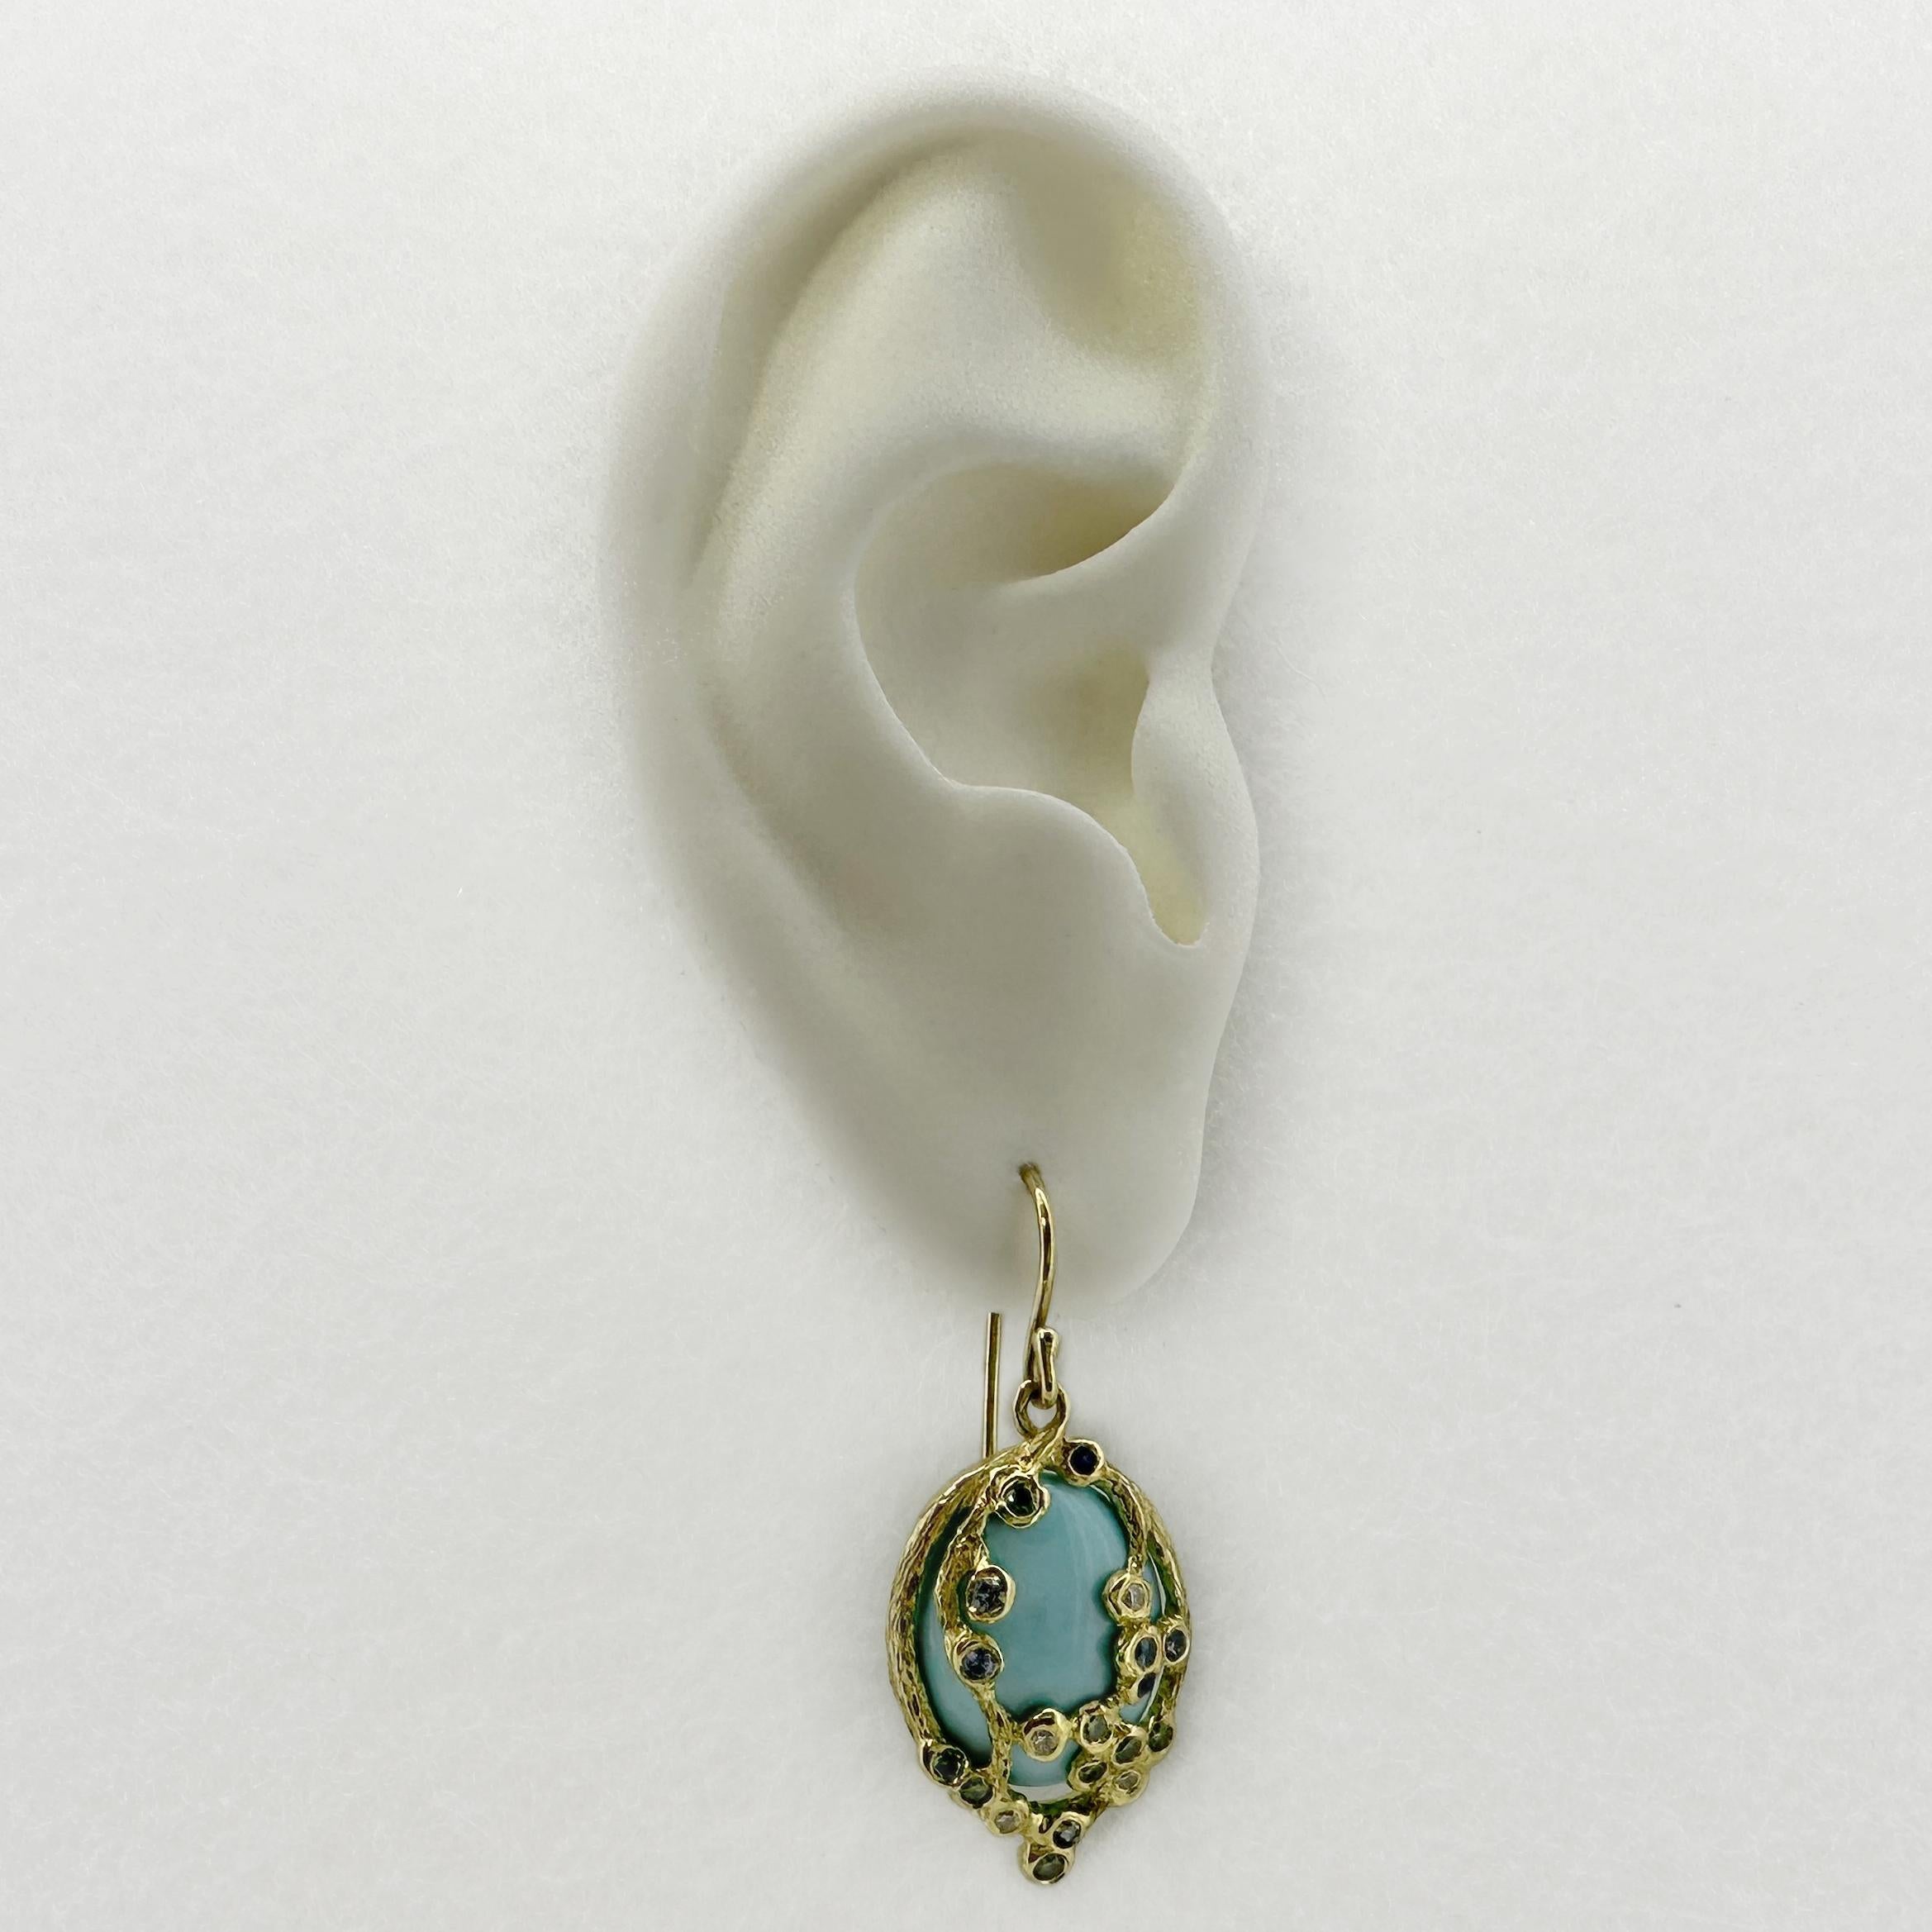 These extraordinary new earrings by Eytan Brandes feature 9 carats of chewy, natural, undyed Sleeping Beauty turquoise.  We purchased these cabochons at a trade show in 2022 from Lunawat Gems, which carries an impressive stock of this costly and